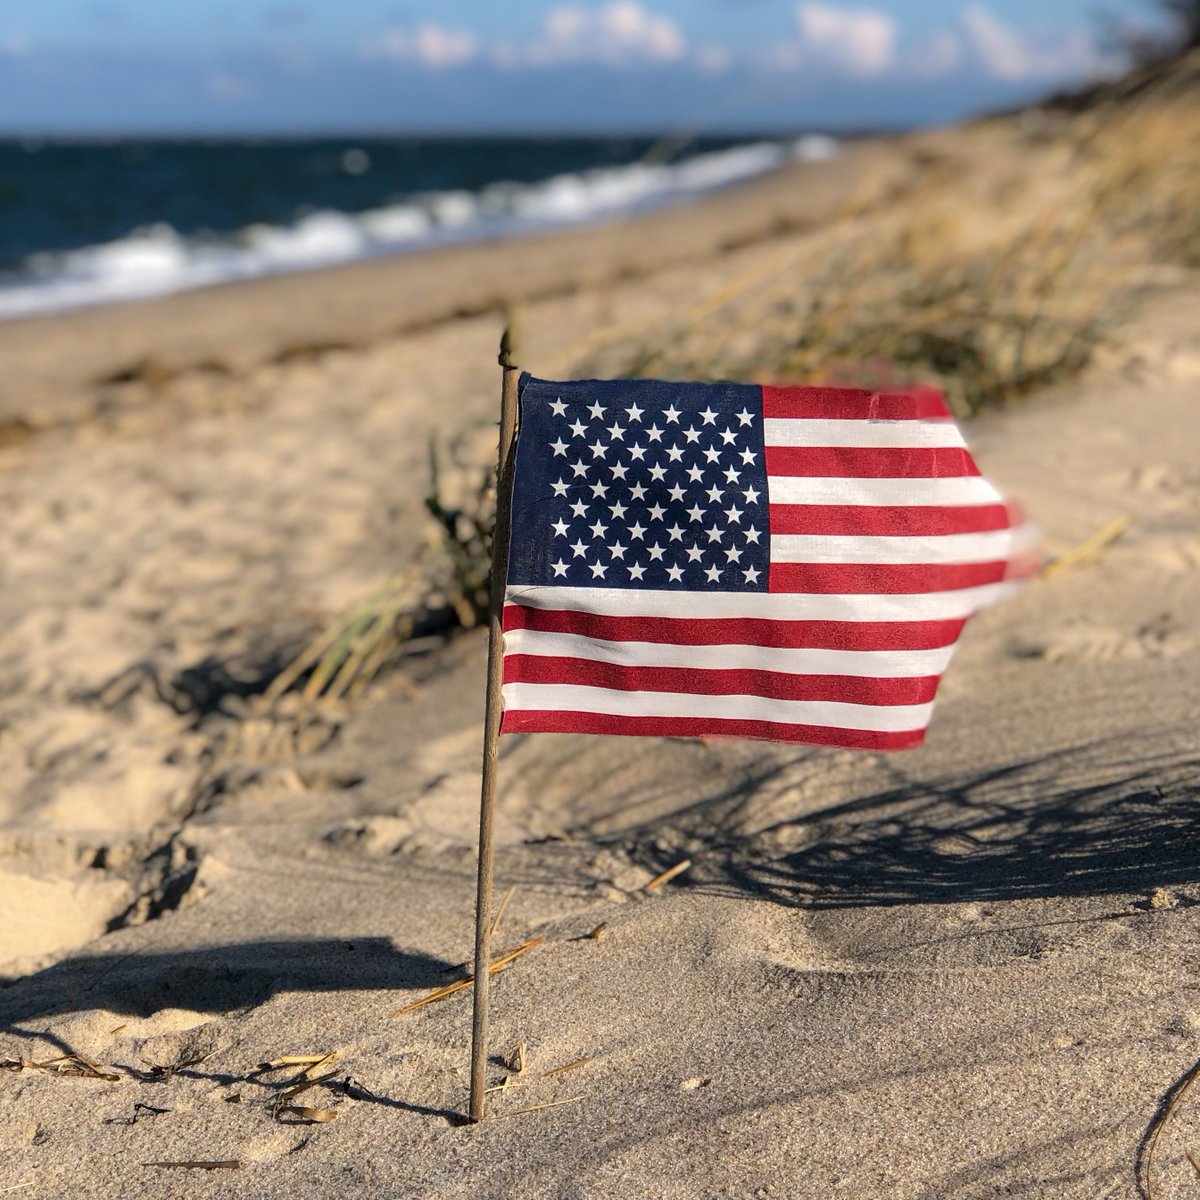 There's no better place to spend the 4th of July weekend than on the beach!

#proactivevacations #holdenbeachnc #holdenbeachnorthcarolina #discovercarolinas #visitnc #ncbeaches #northcarolinabeaches #beachvacation #ncbeachvacation #holdenbeachvacation  #beachlife